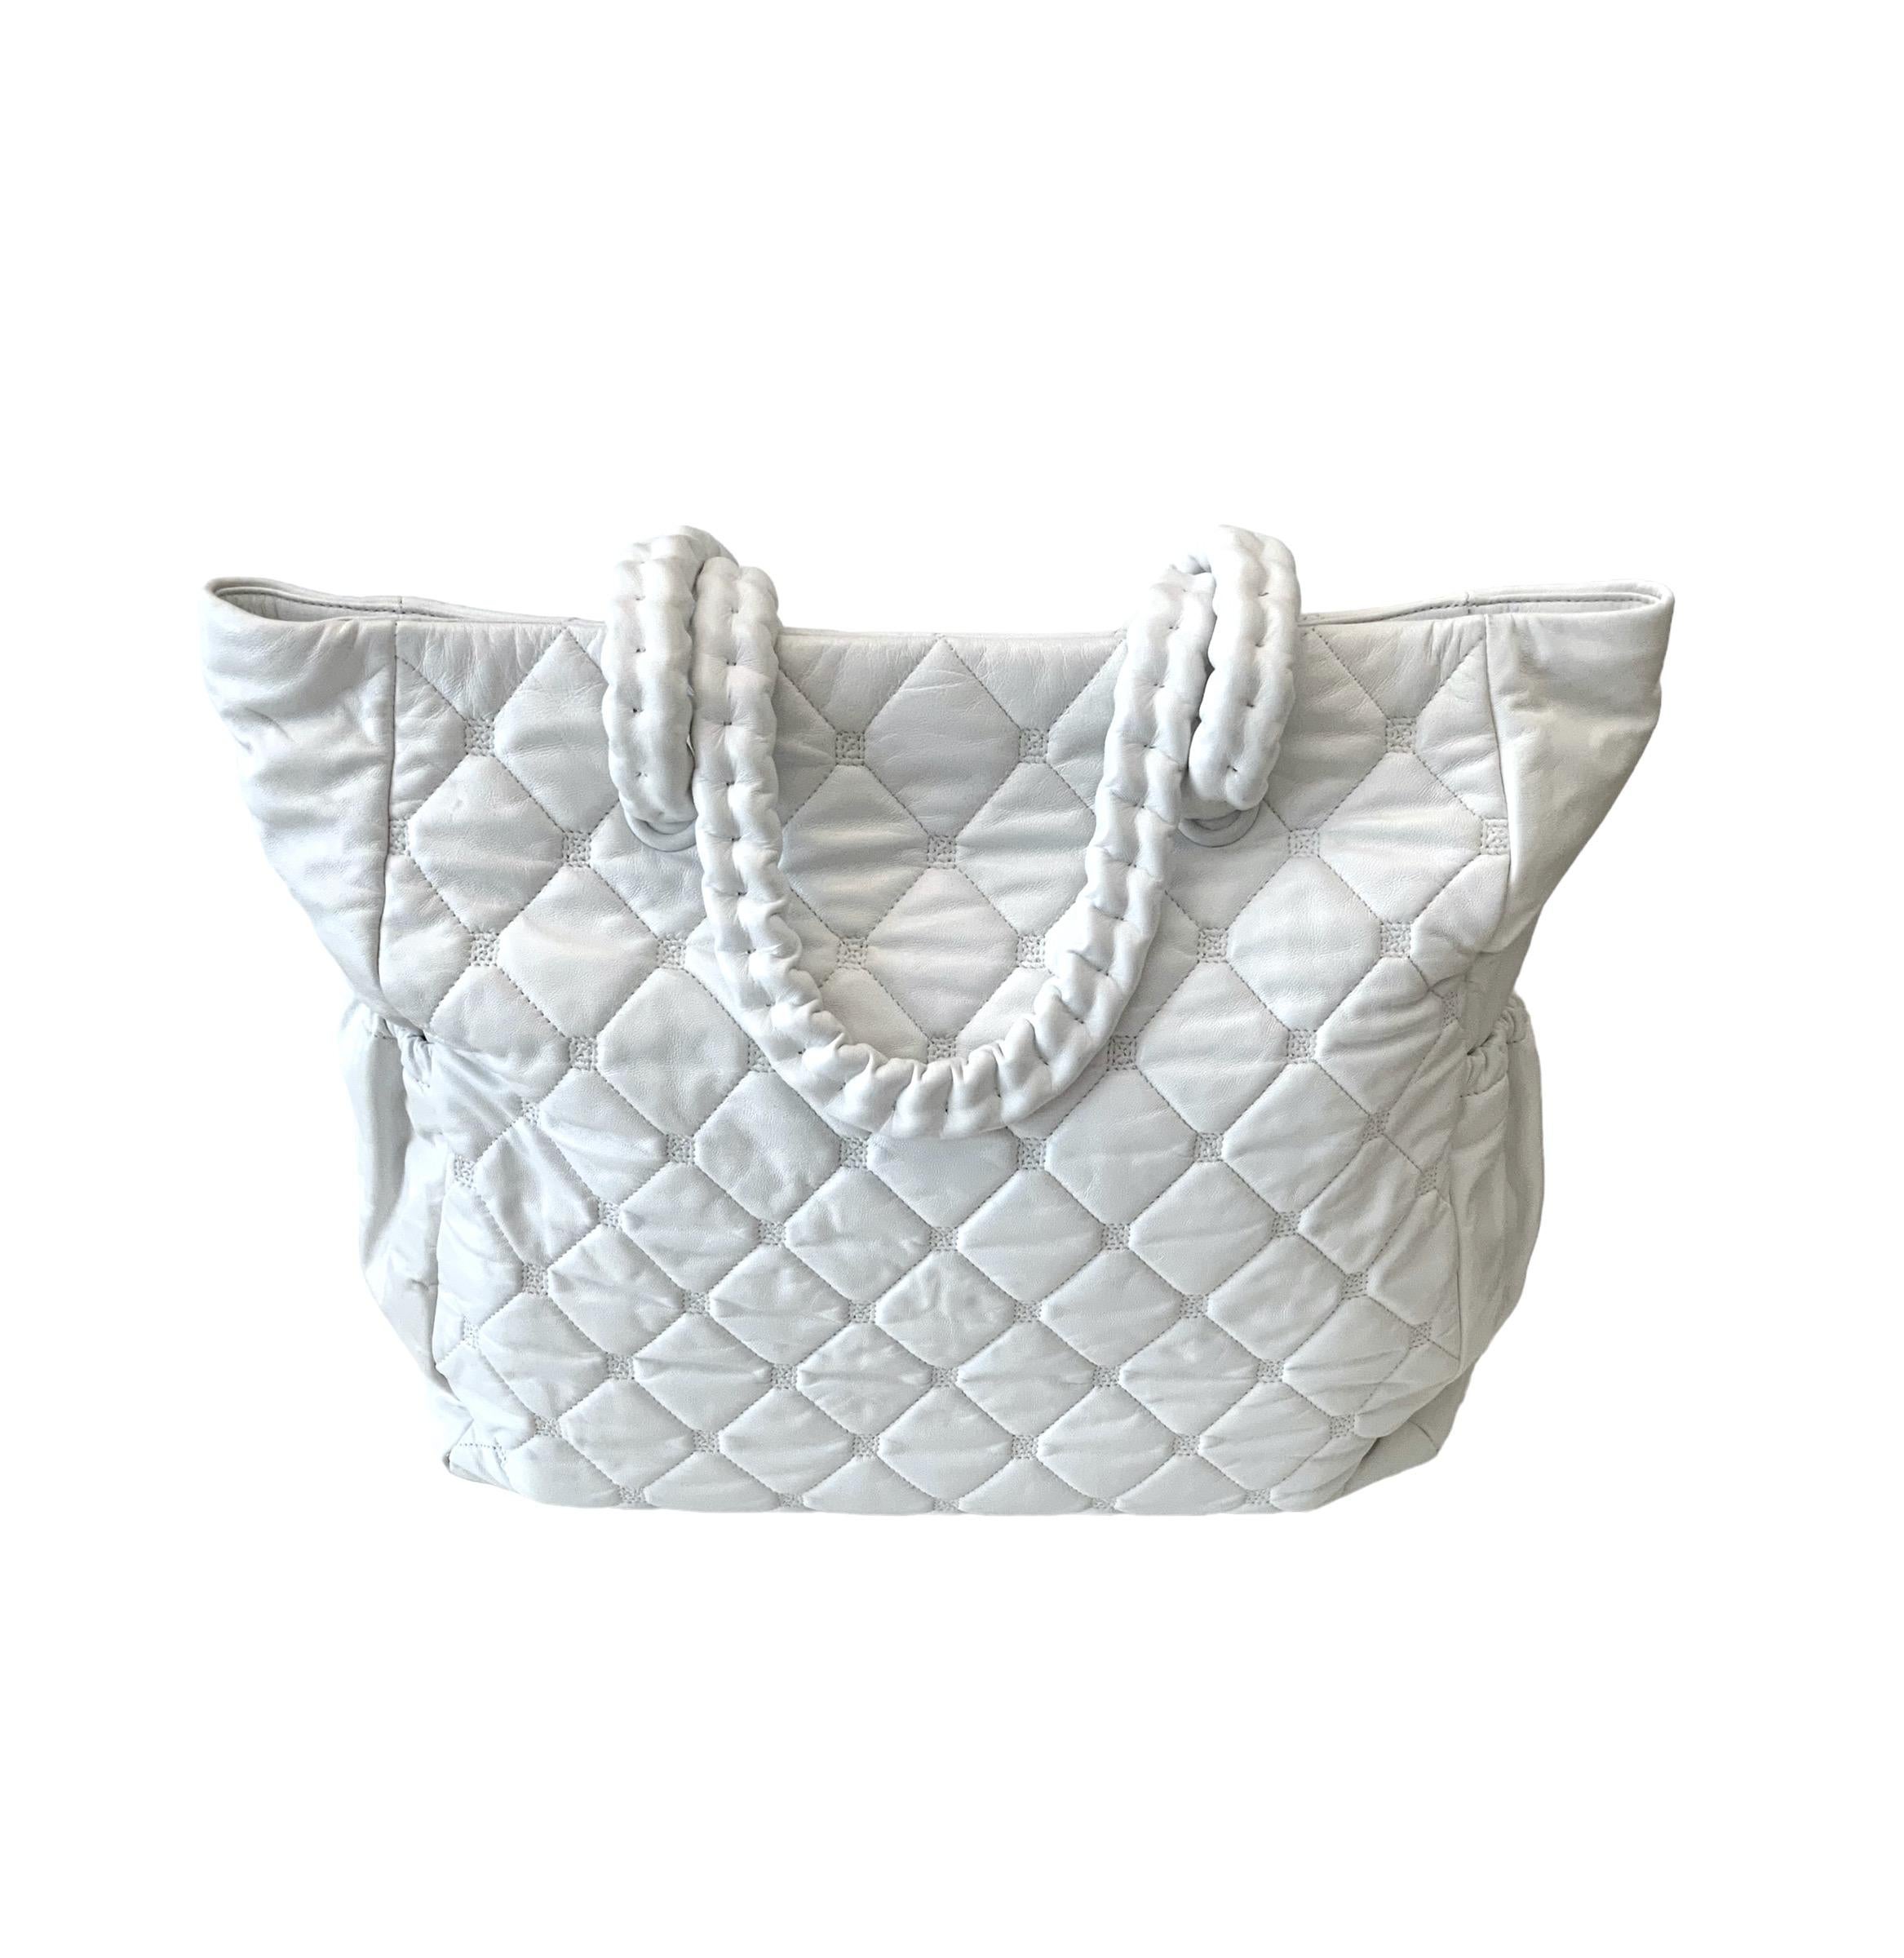 Women's or Men's Chanel White Leather Hidden Chain Tote Bag For Sale